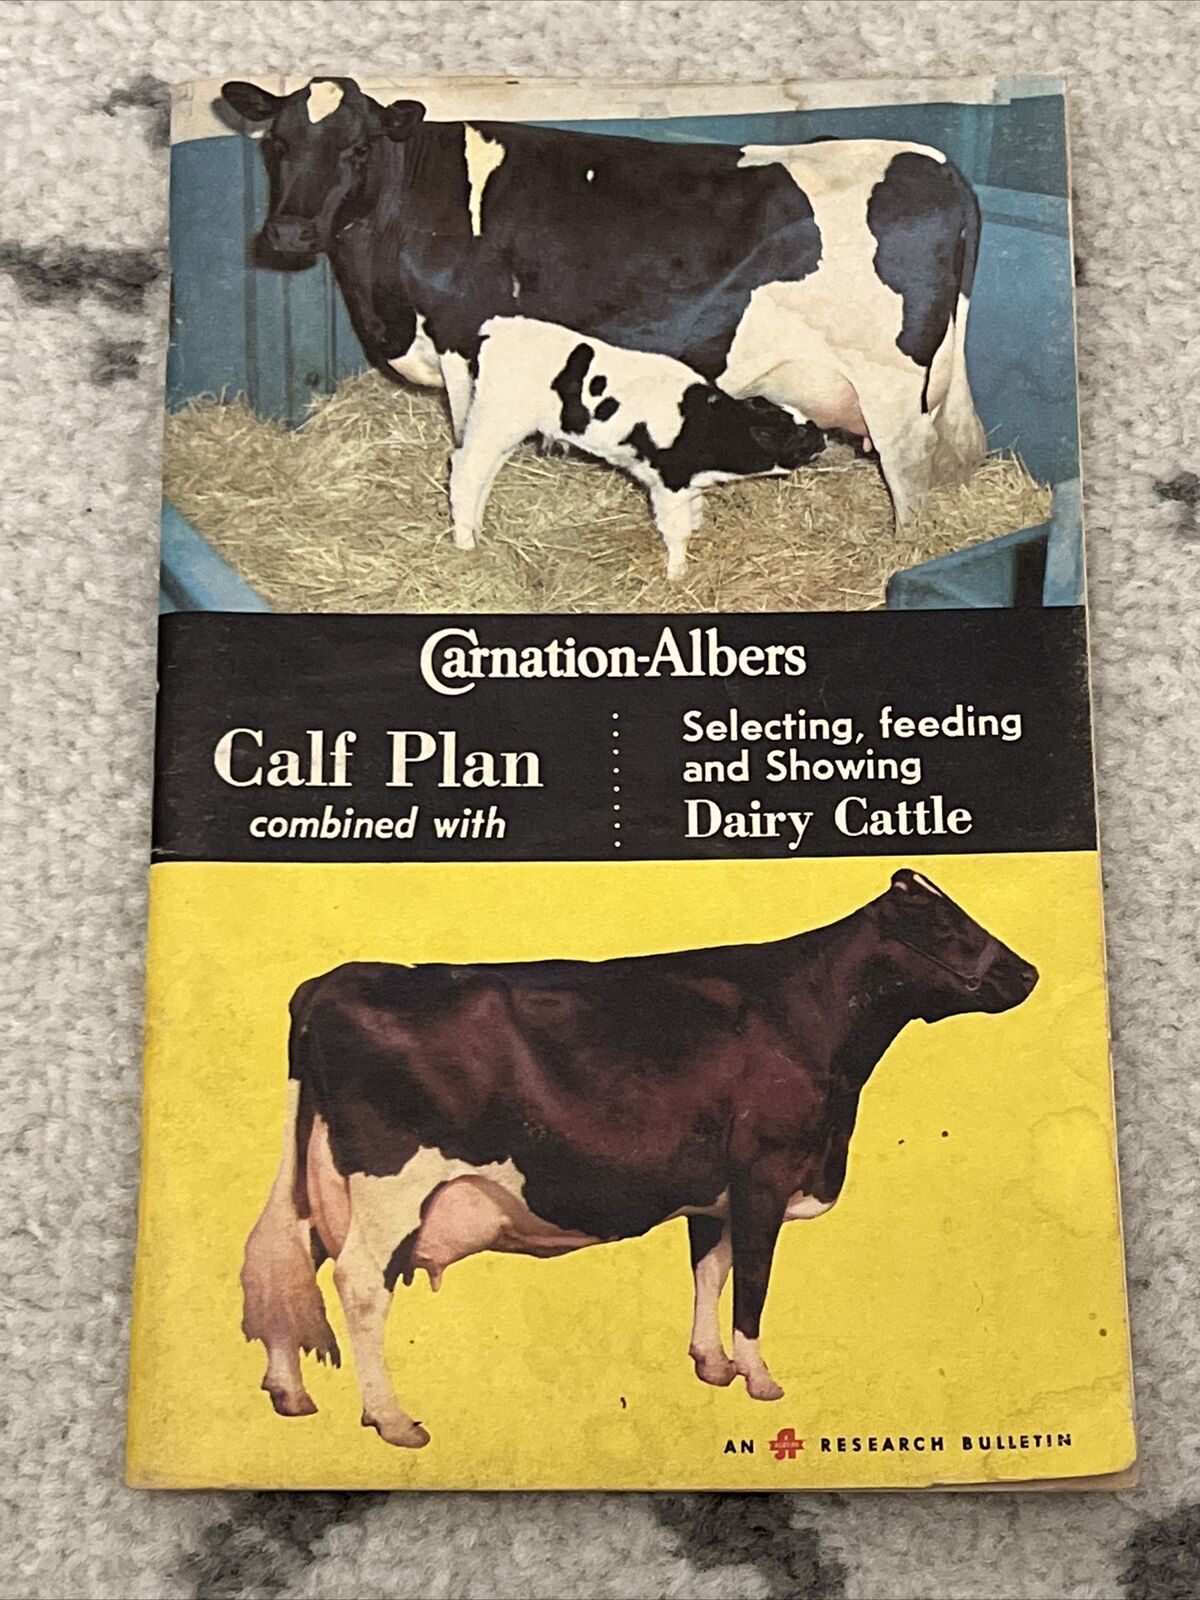 Albers Milling Company 1968 Carnation Albers Calf Plan Selecting Feeding Showing